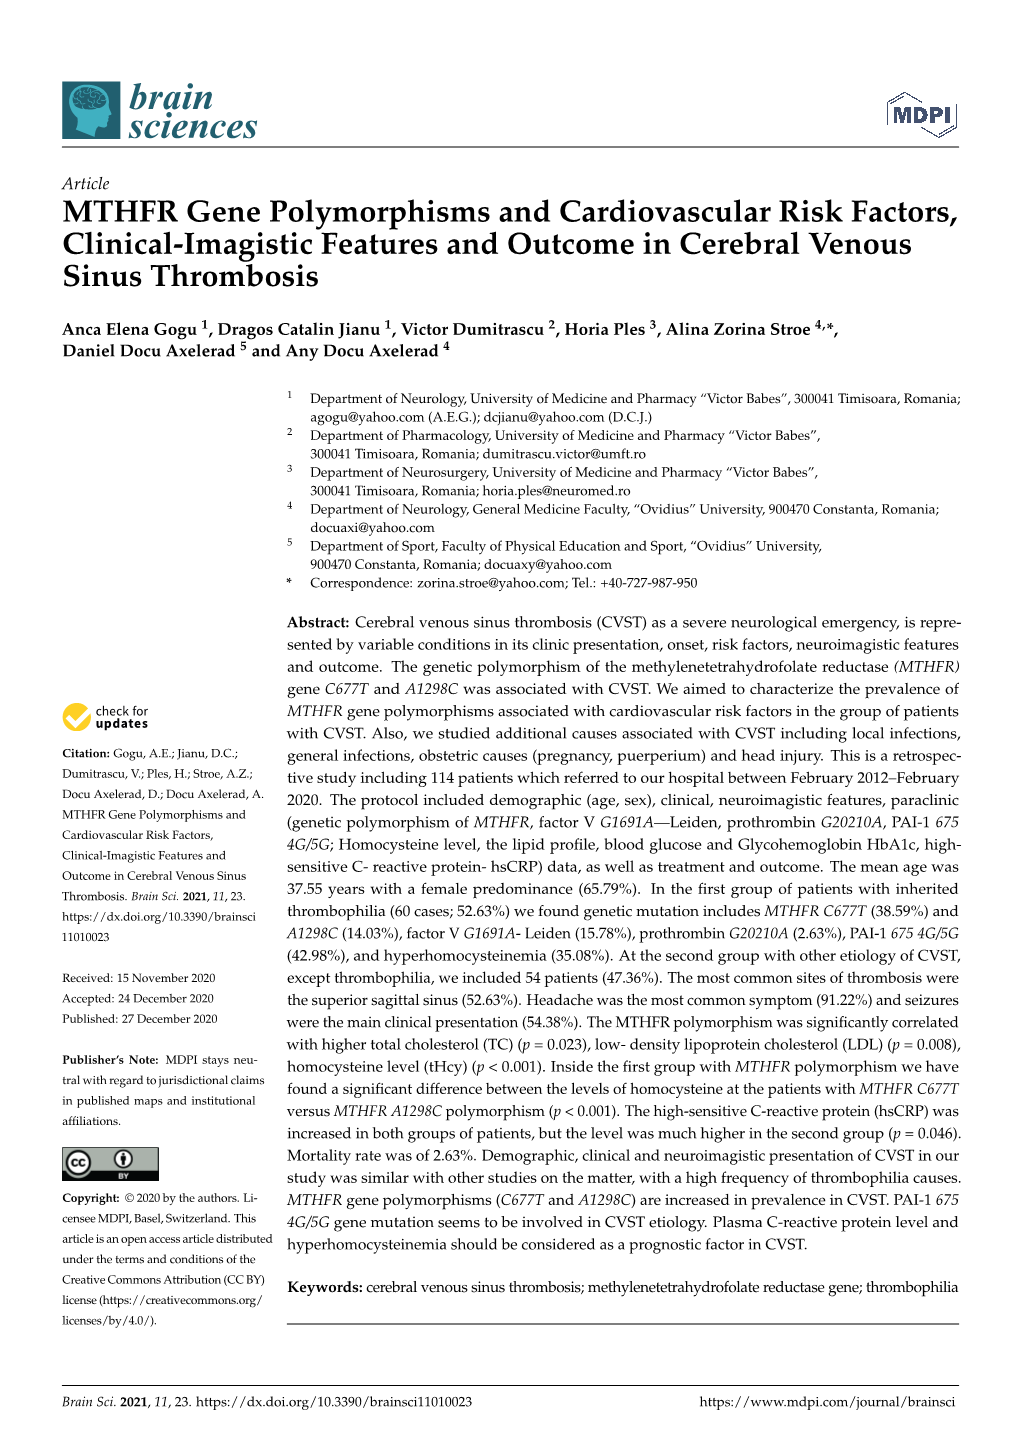 MTHFR Gene Polymorphisms and Cardiovascular Risk Factors, Clinical-Imagistic Features and Outcome in Cerebral Venous Sinus Thrombosis